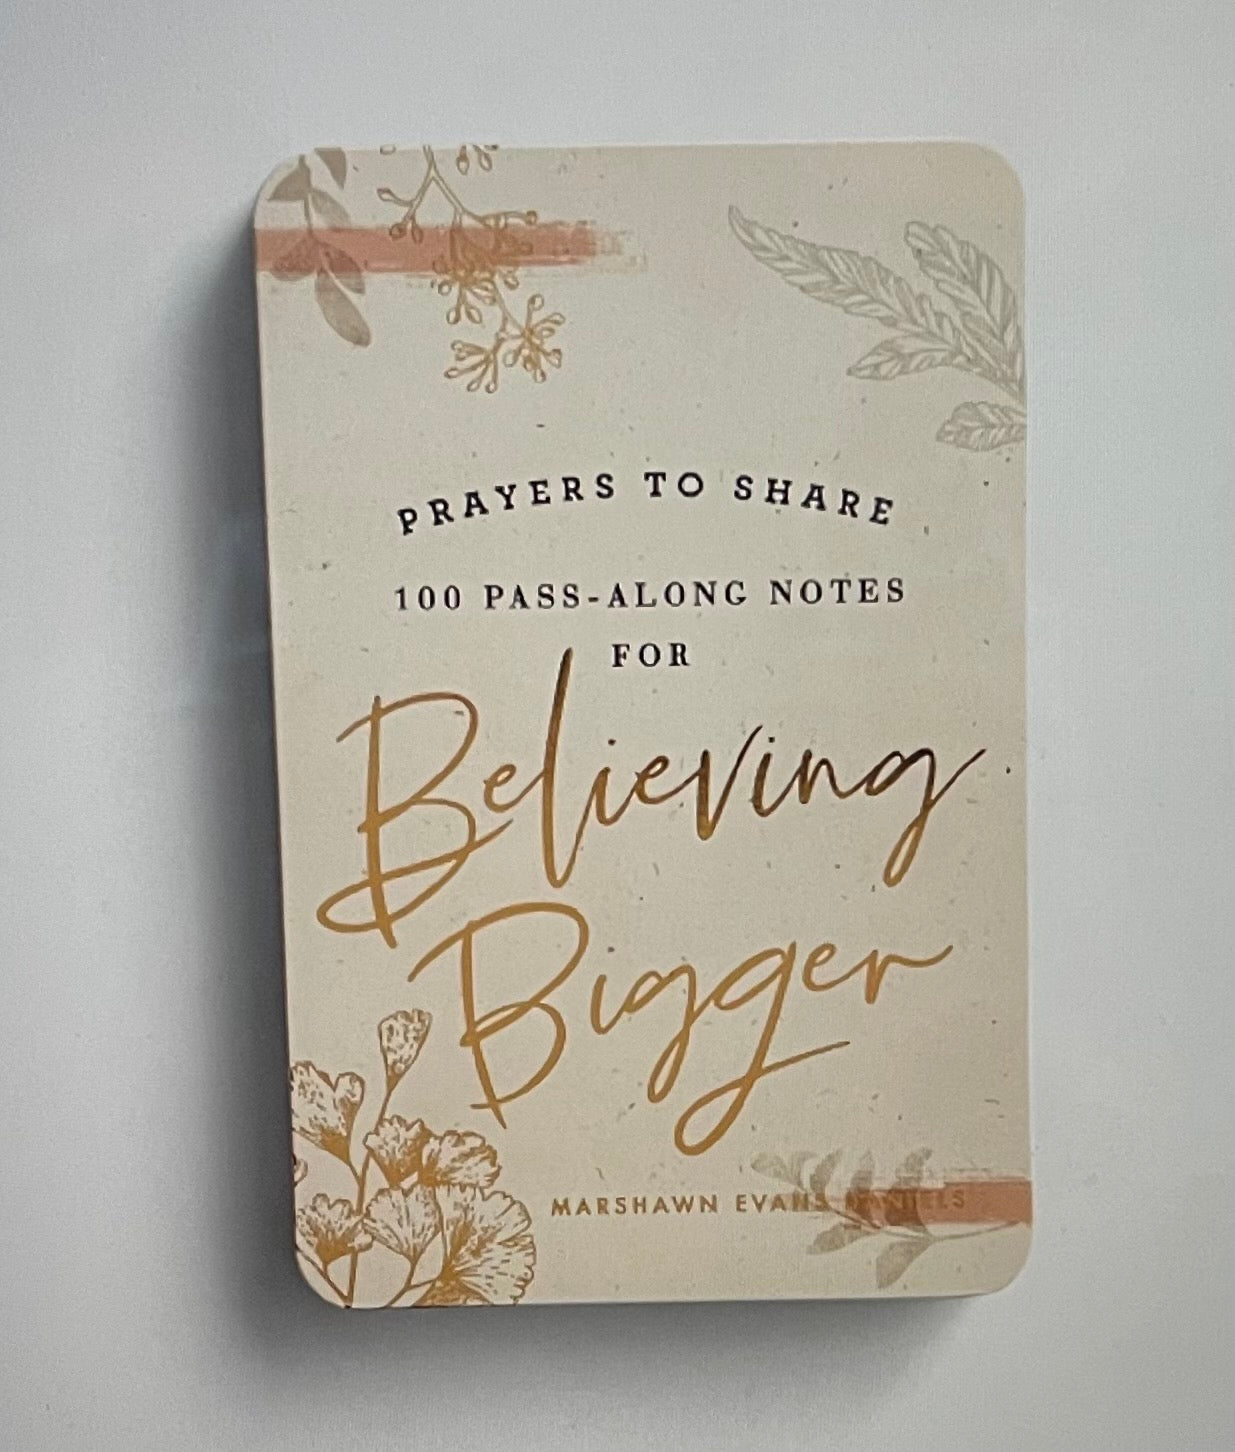 Marshawn Evans Daniels - Prayers to Share: 100 Pass-Along Notes for Believing Bigger